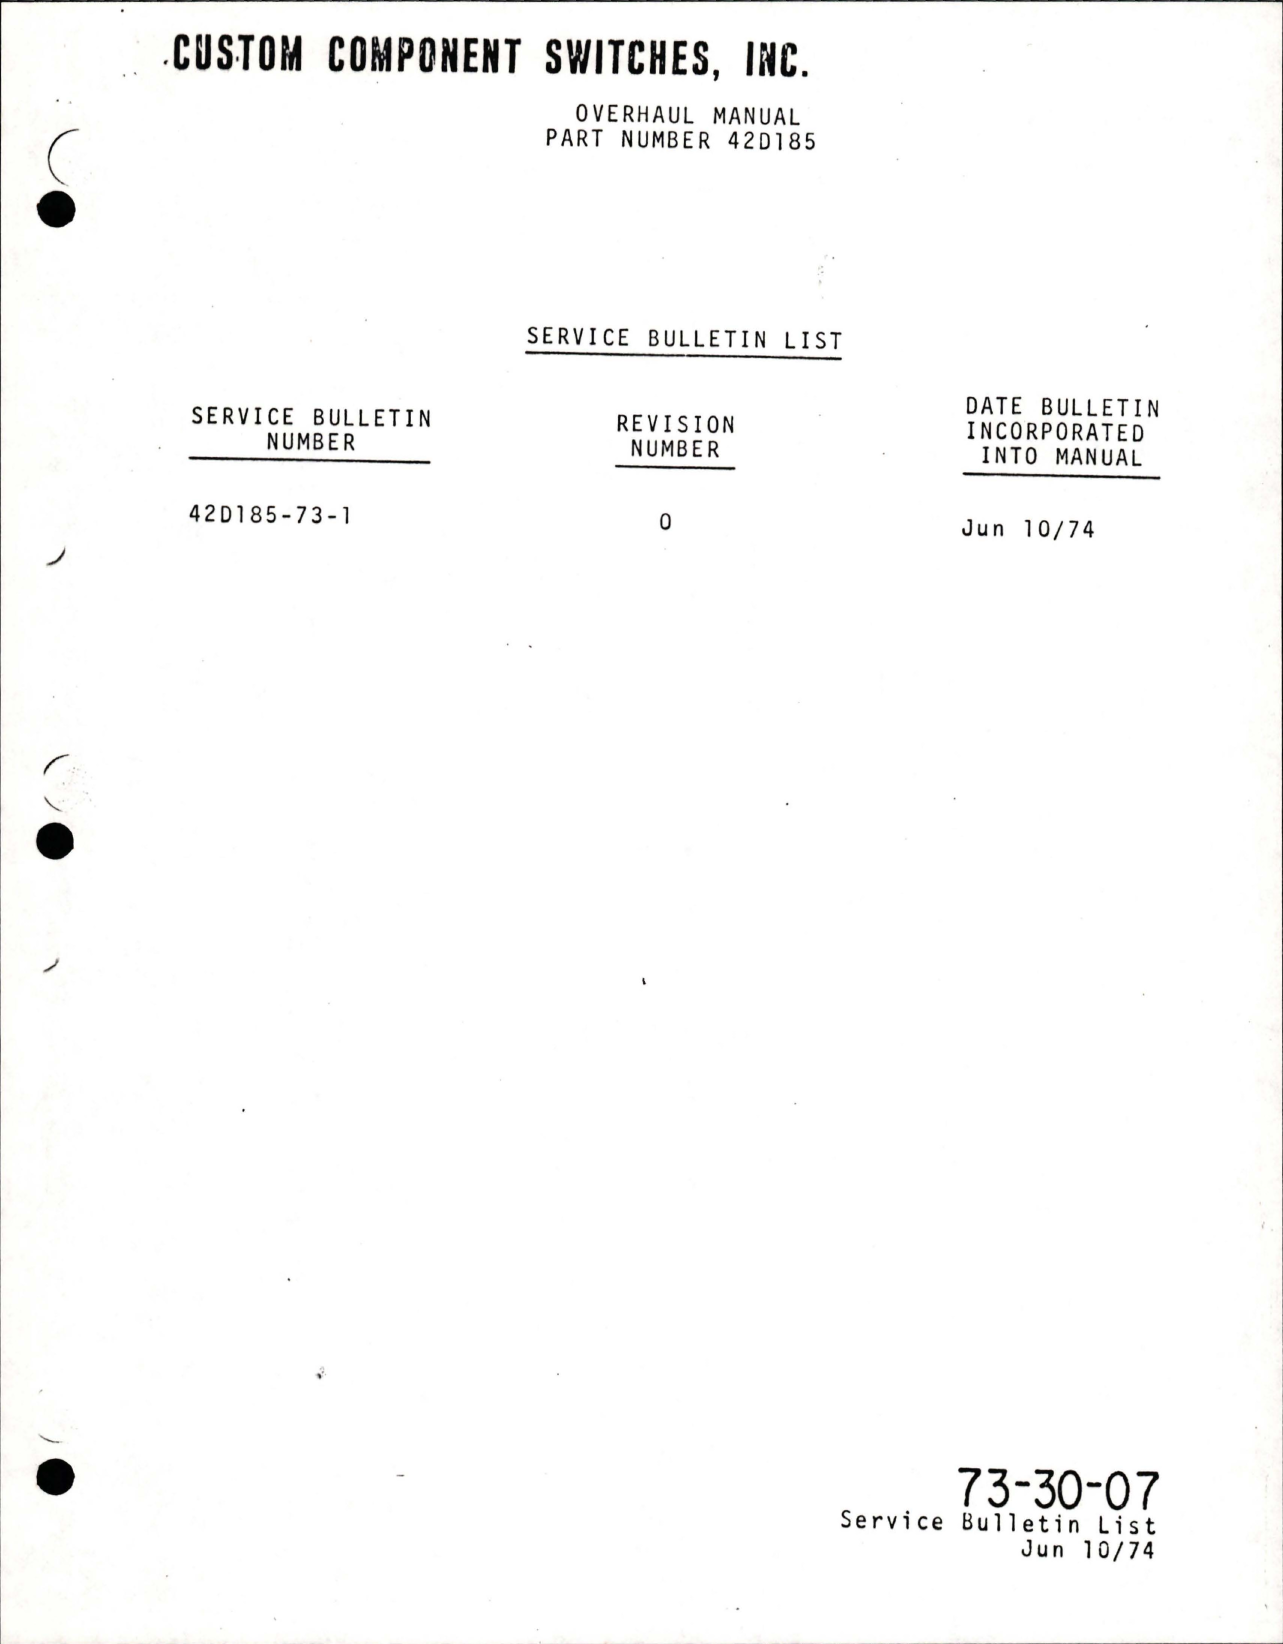 Sample page 5 from AirCorps Library document: Overhaul for Pressure Switch - Part 42D185 